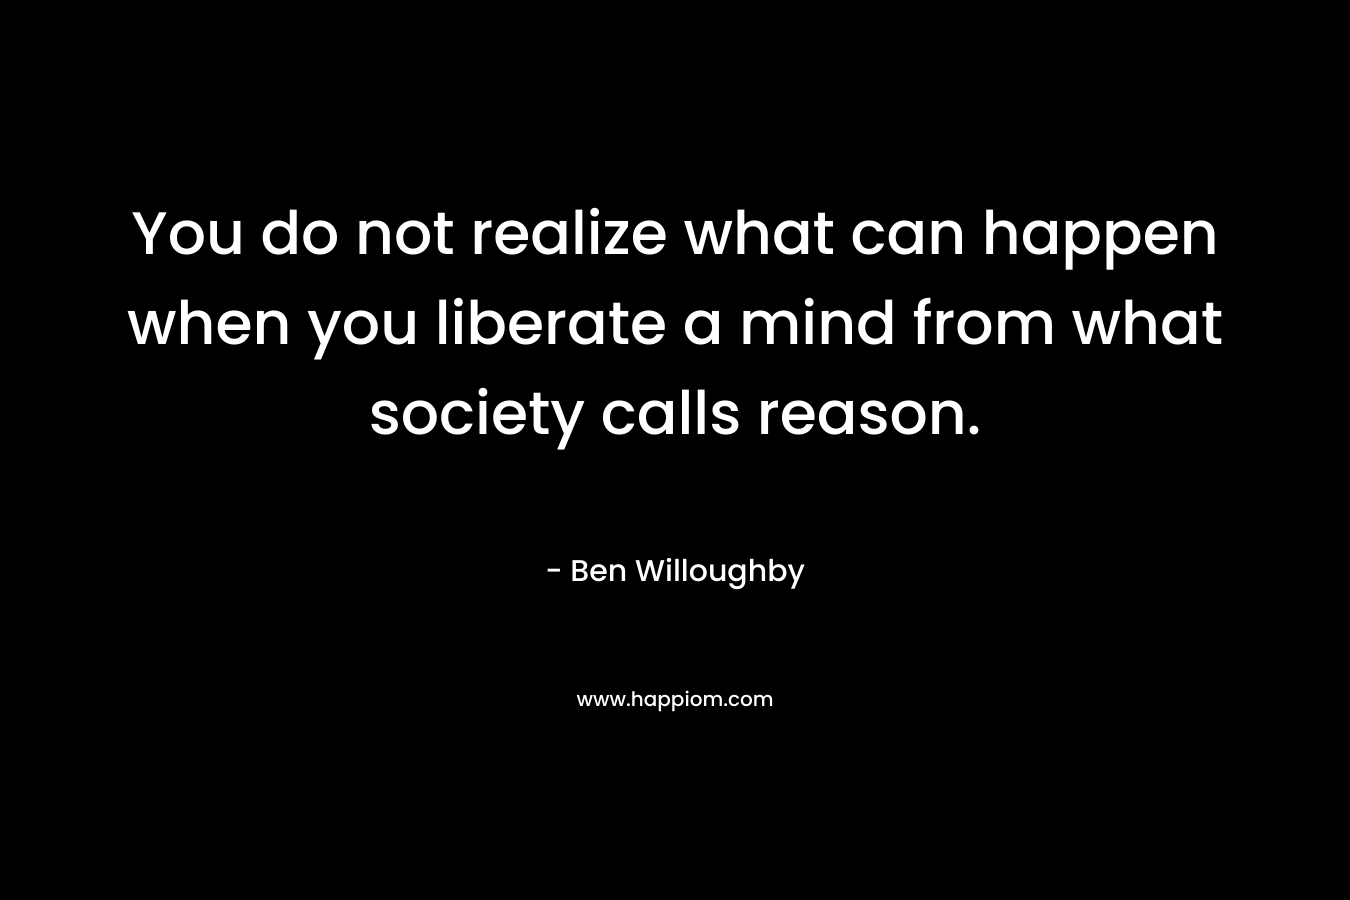 You do not realize what can happen when you liberate a mind from what society calls reason. – Ben Willoughby